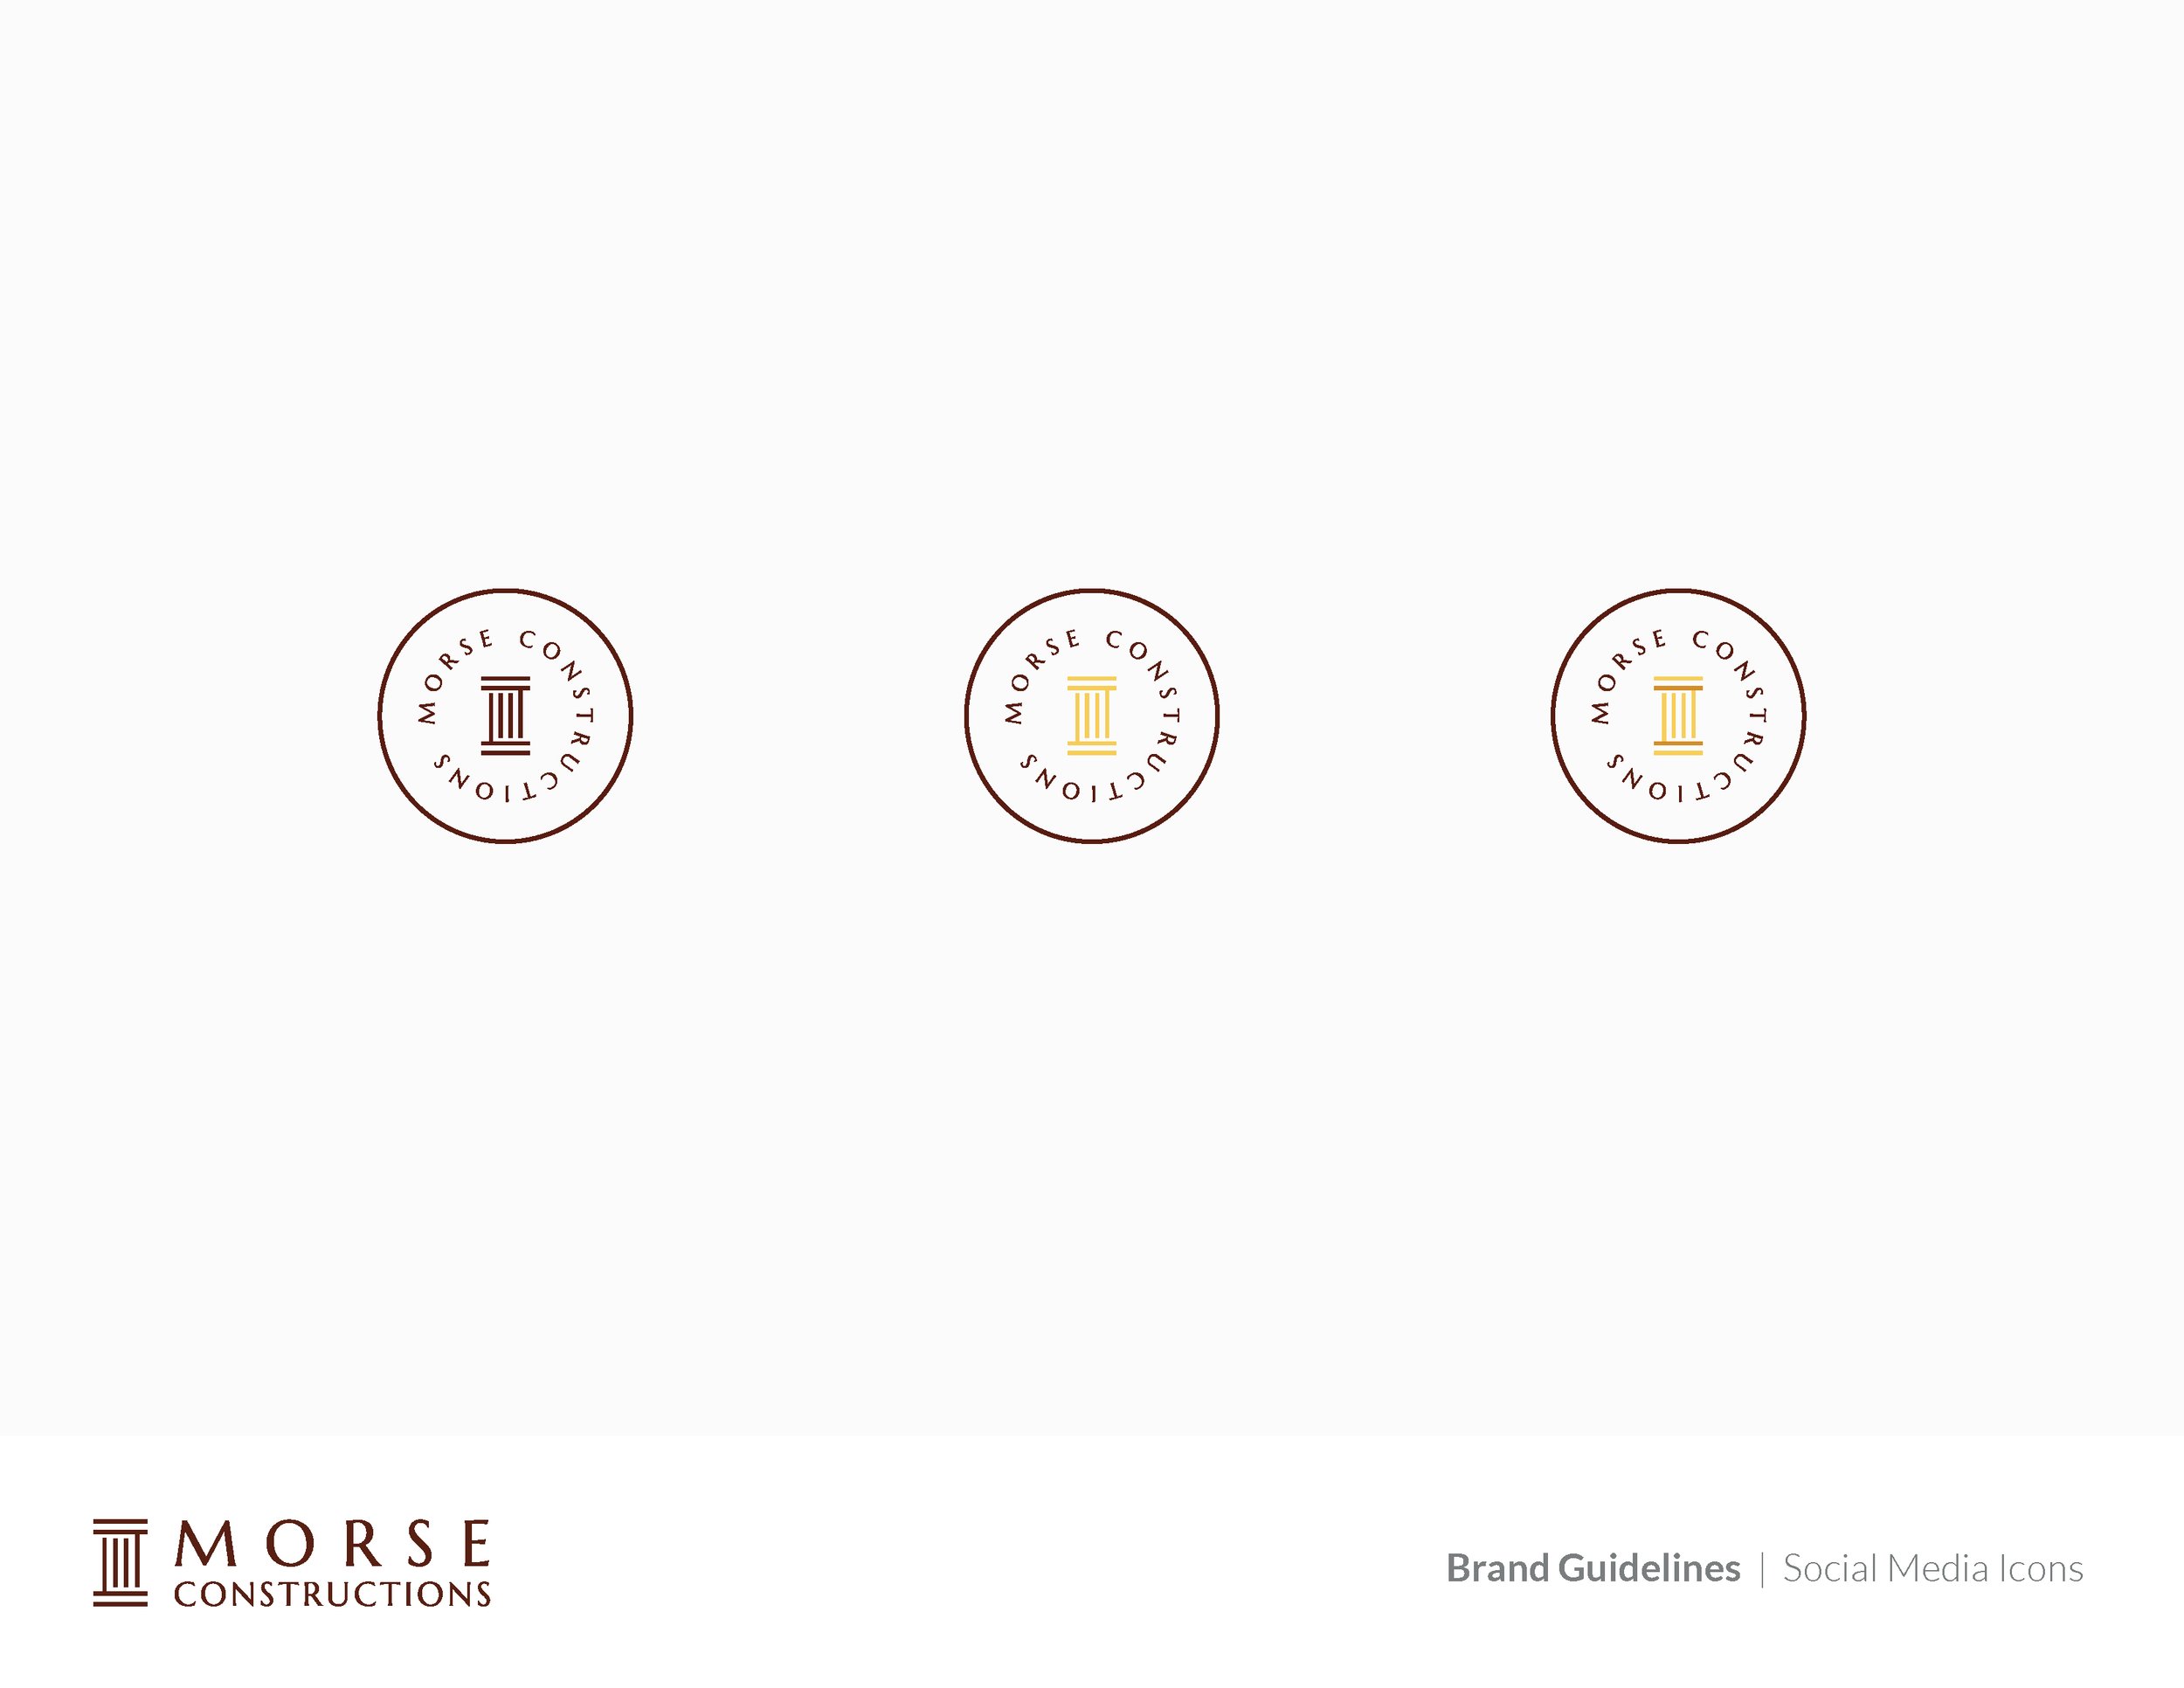 Morse Constructions Brand Guidelines 5.jpg